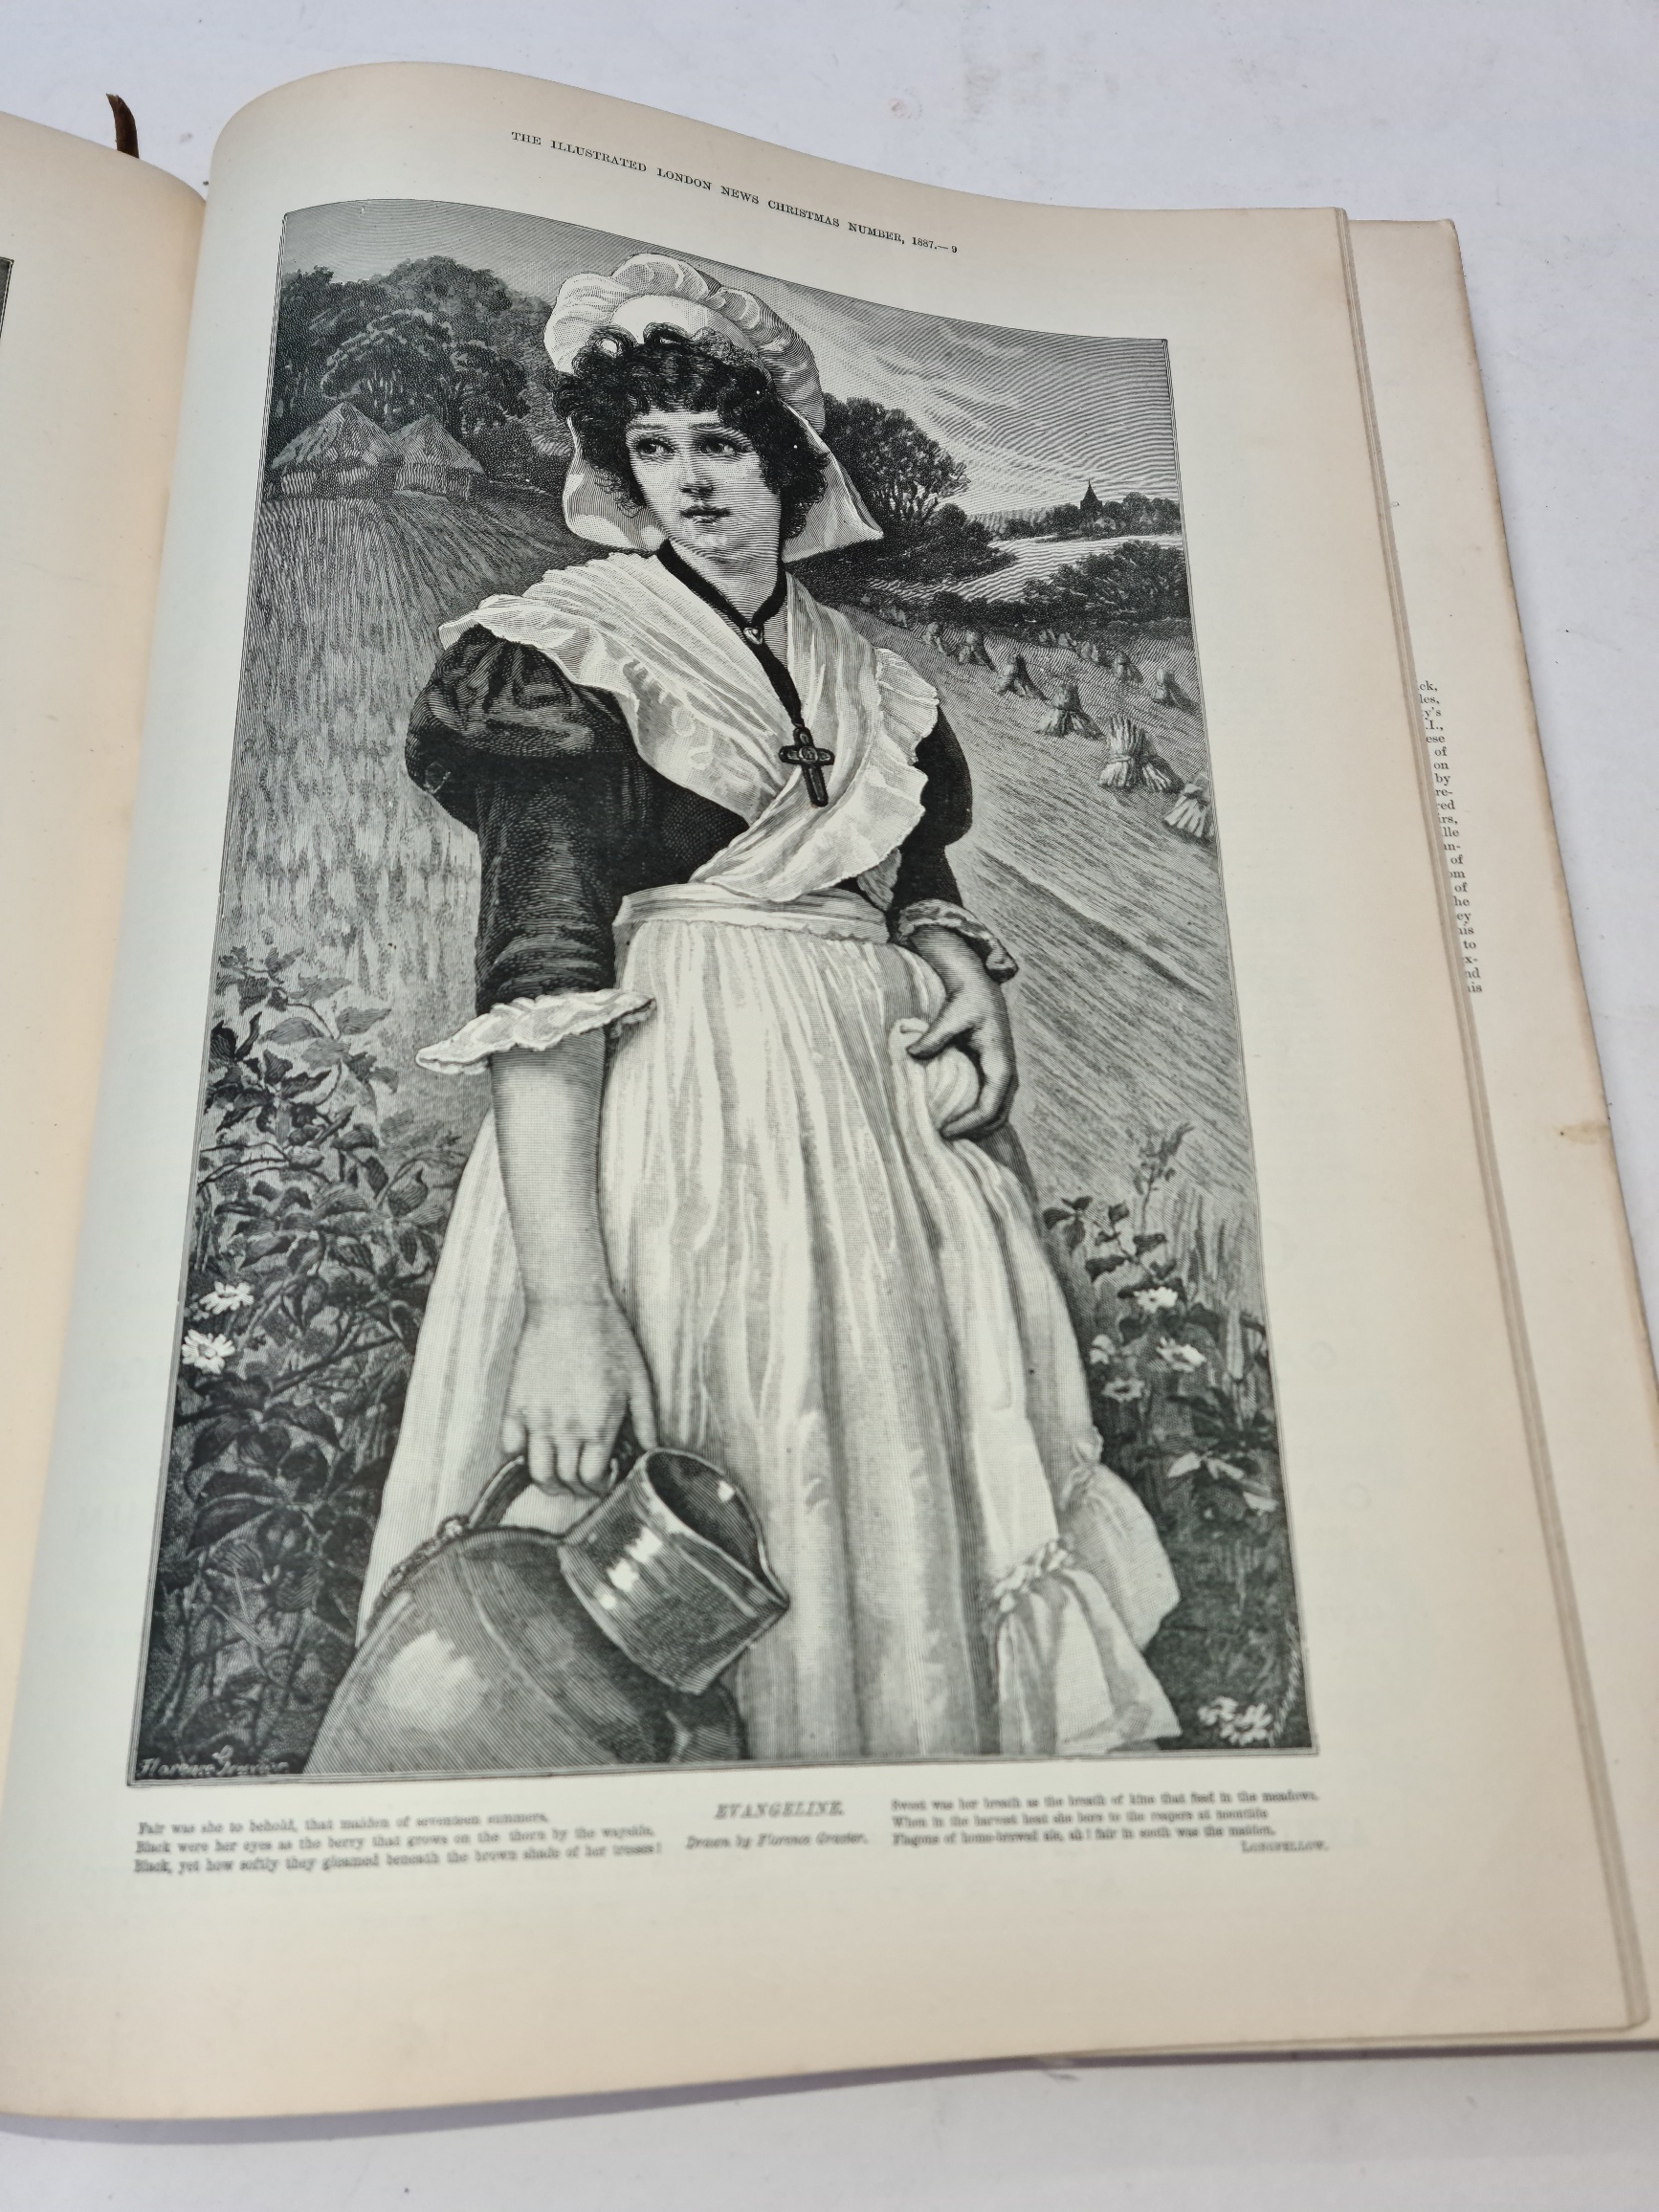 Bound vols London Illustrated News and and a 19th century Scottish bible. - Image 2 of 6